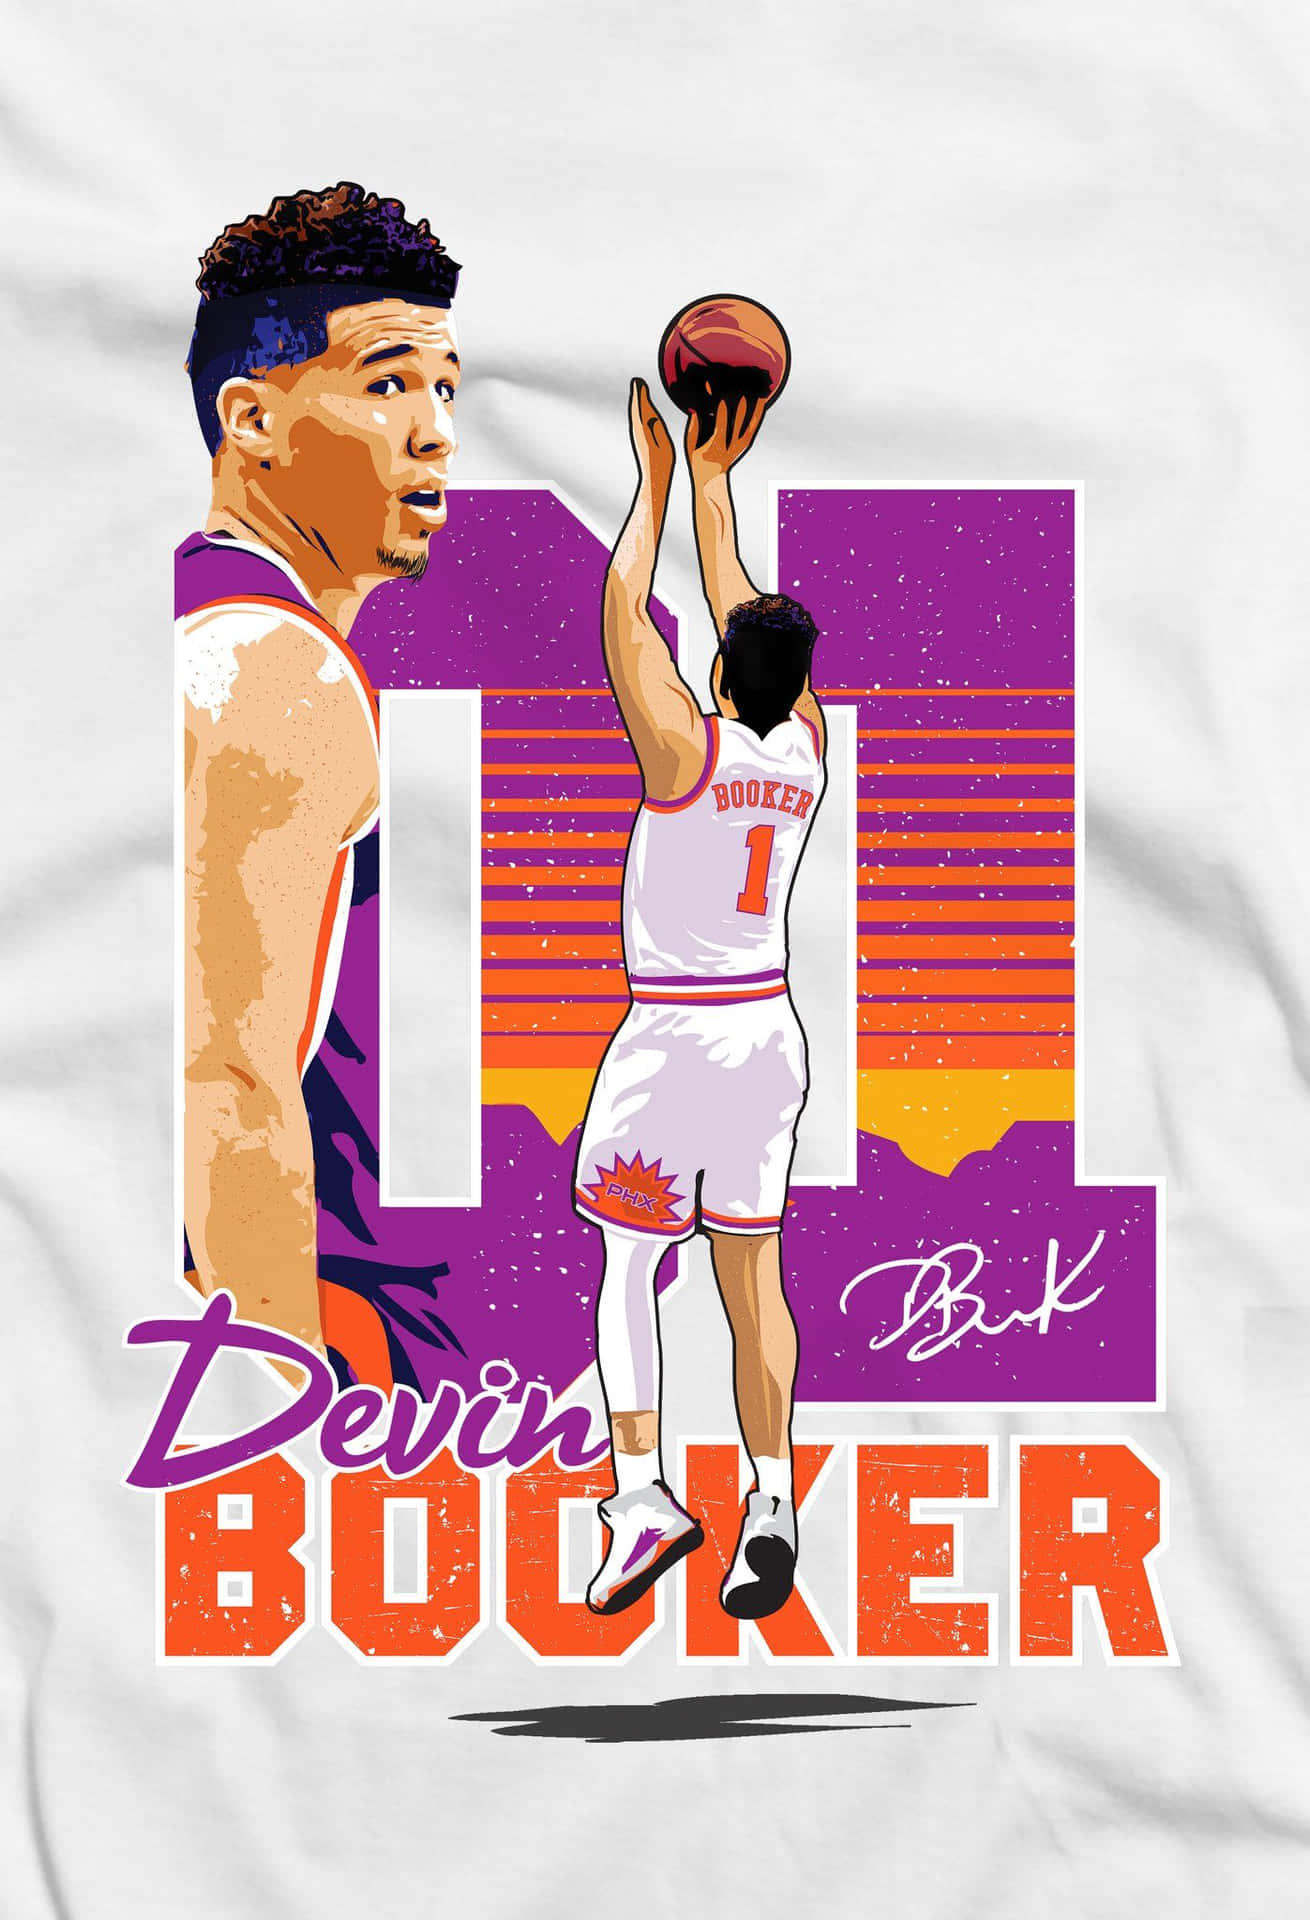 Check out this sick new Devin Booker iPhone! Wallpaper